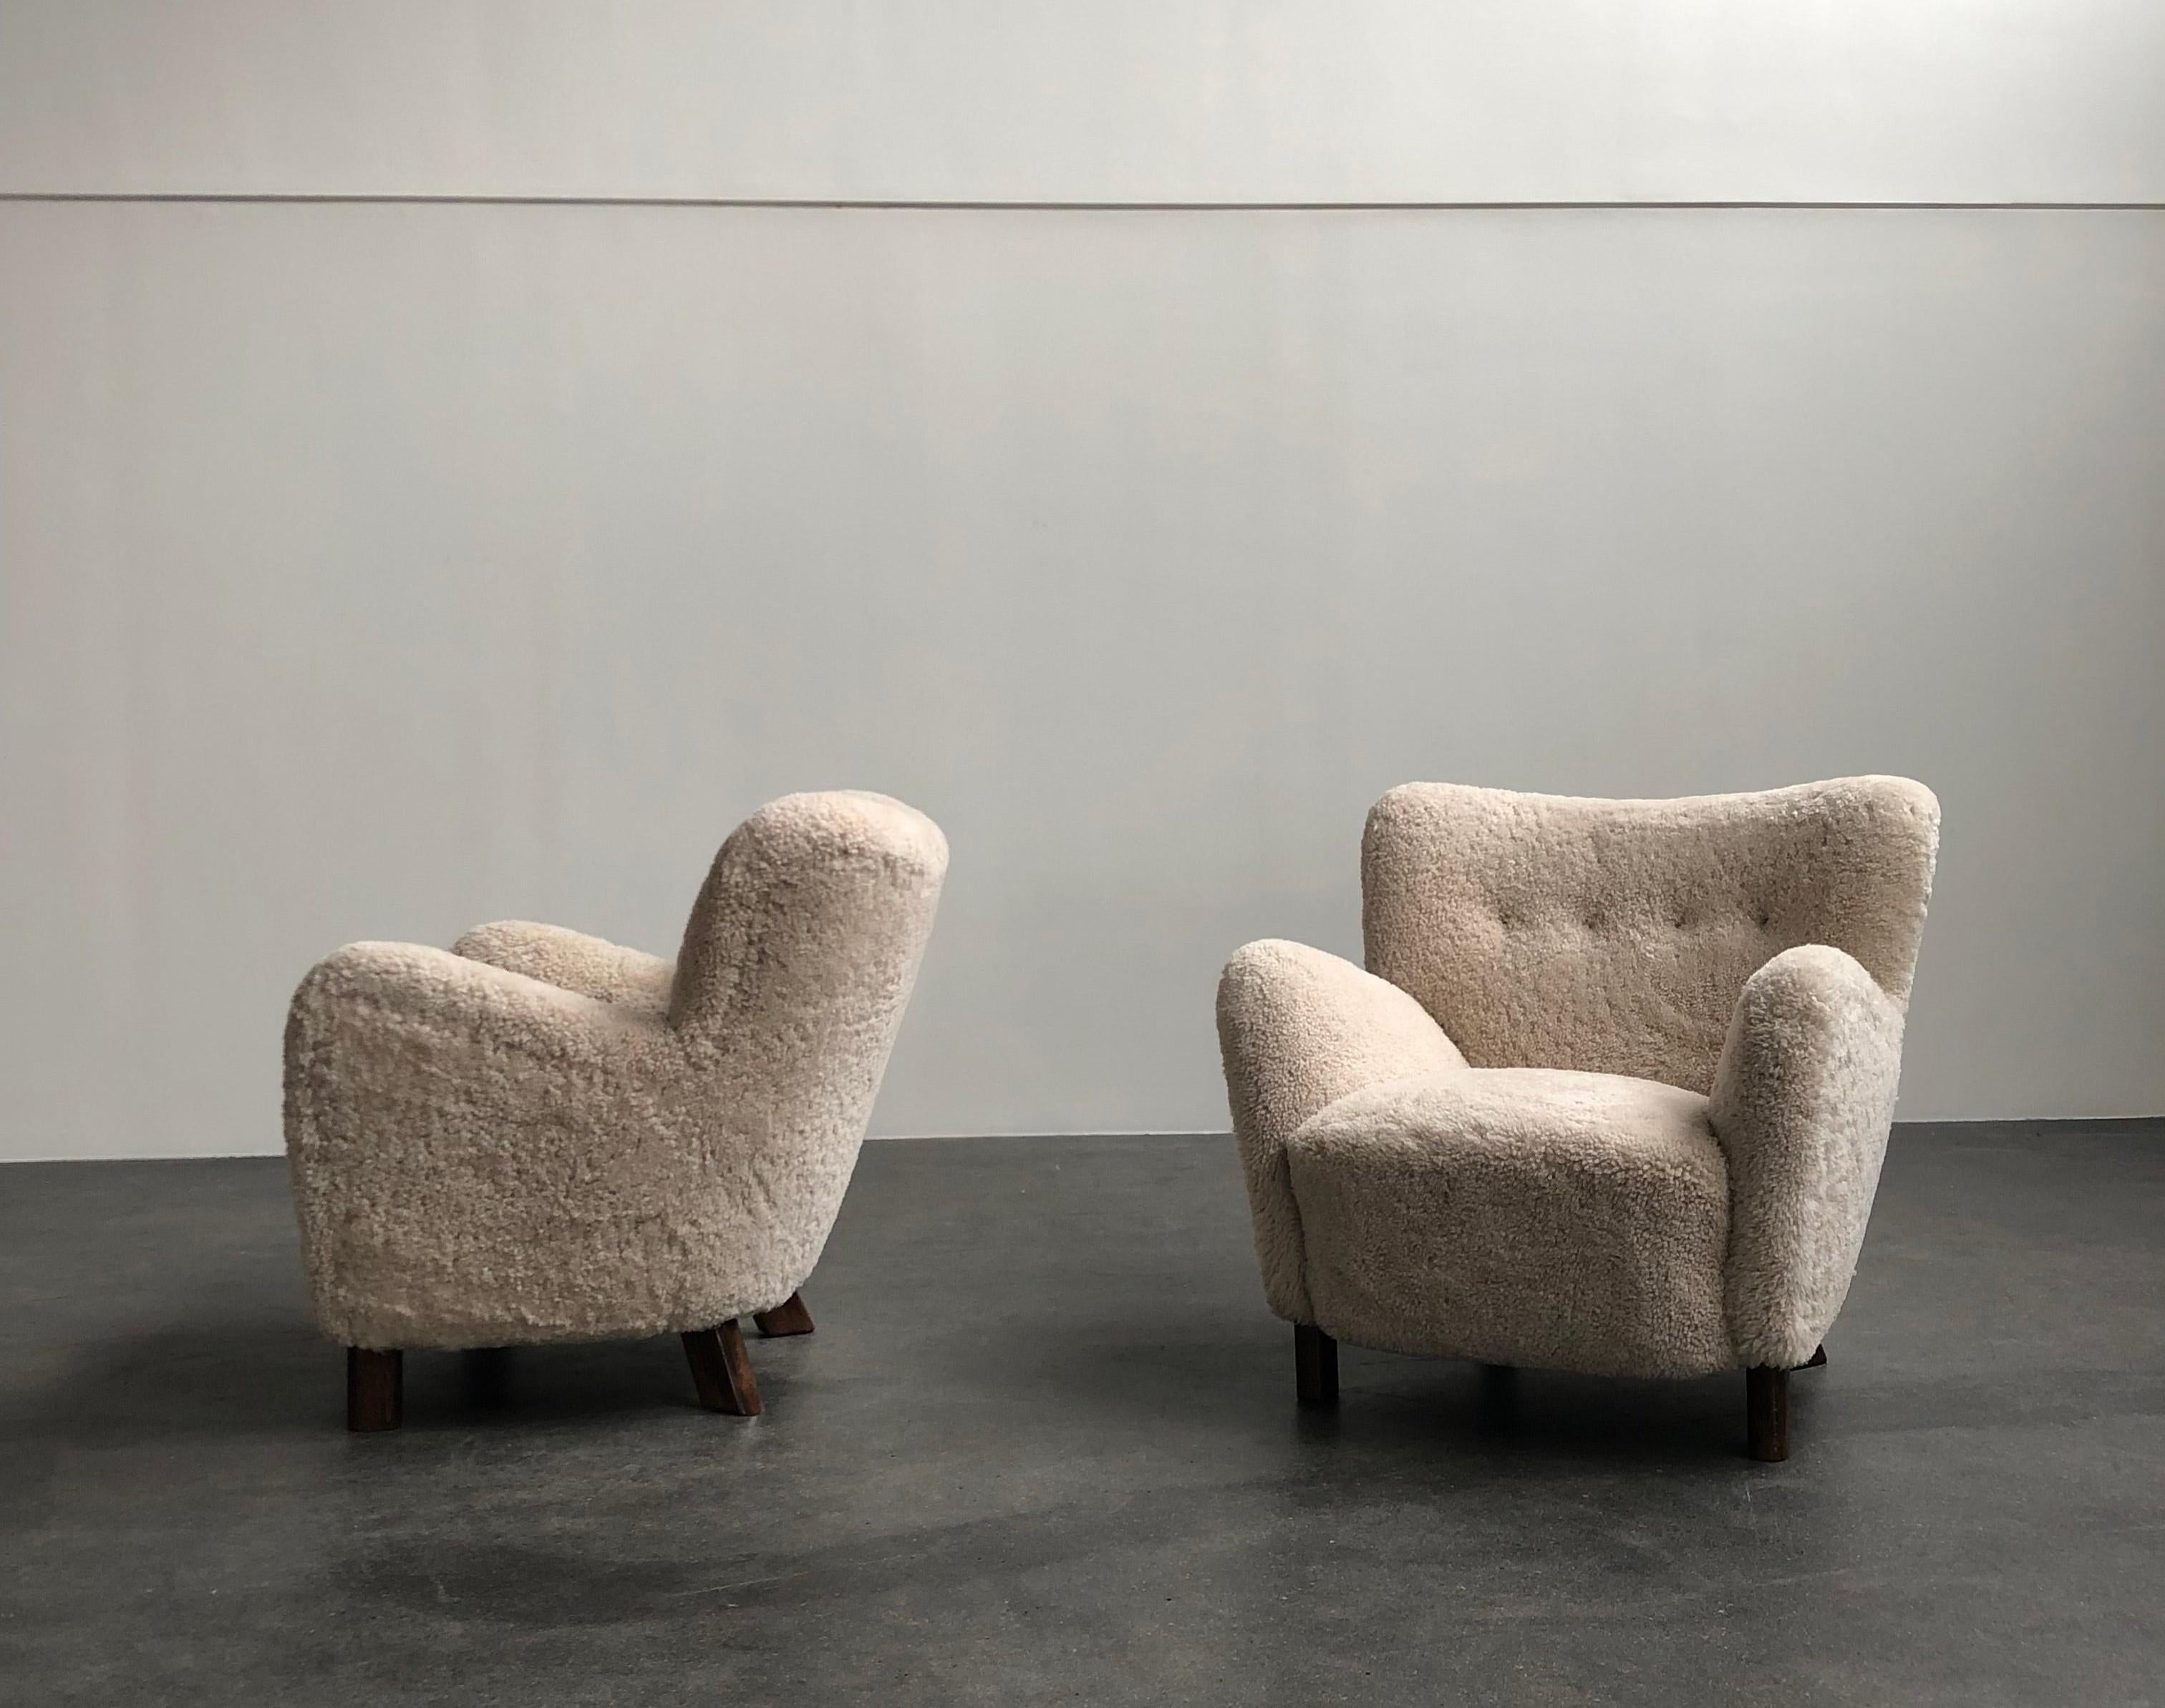 Pair of Fritz Hansen easy chairs, model 1669, circa 1930s.

Sculptural chair re-upholstered in beige sheepskin, legs of stained beech. All work carried out as original with filling in organic materials and bottom finish with nails.

Price is for the